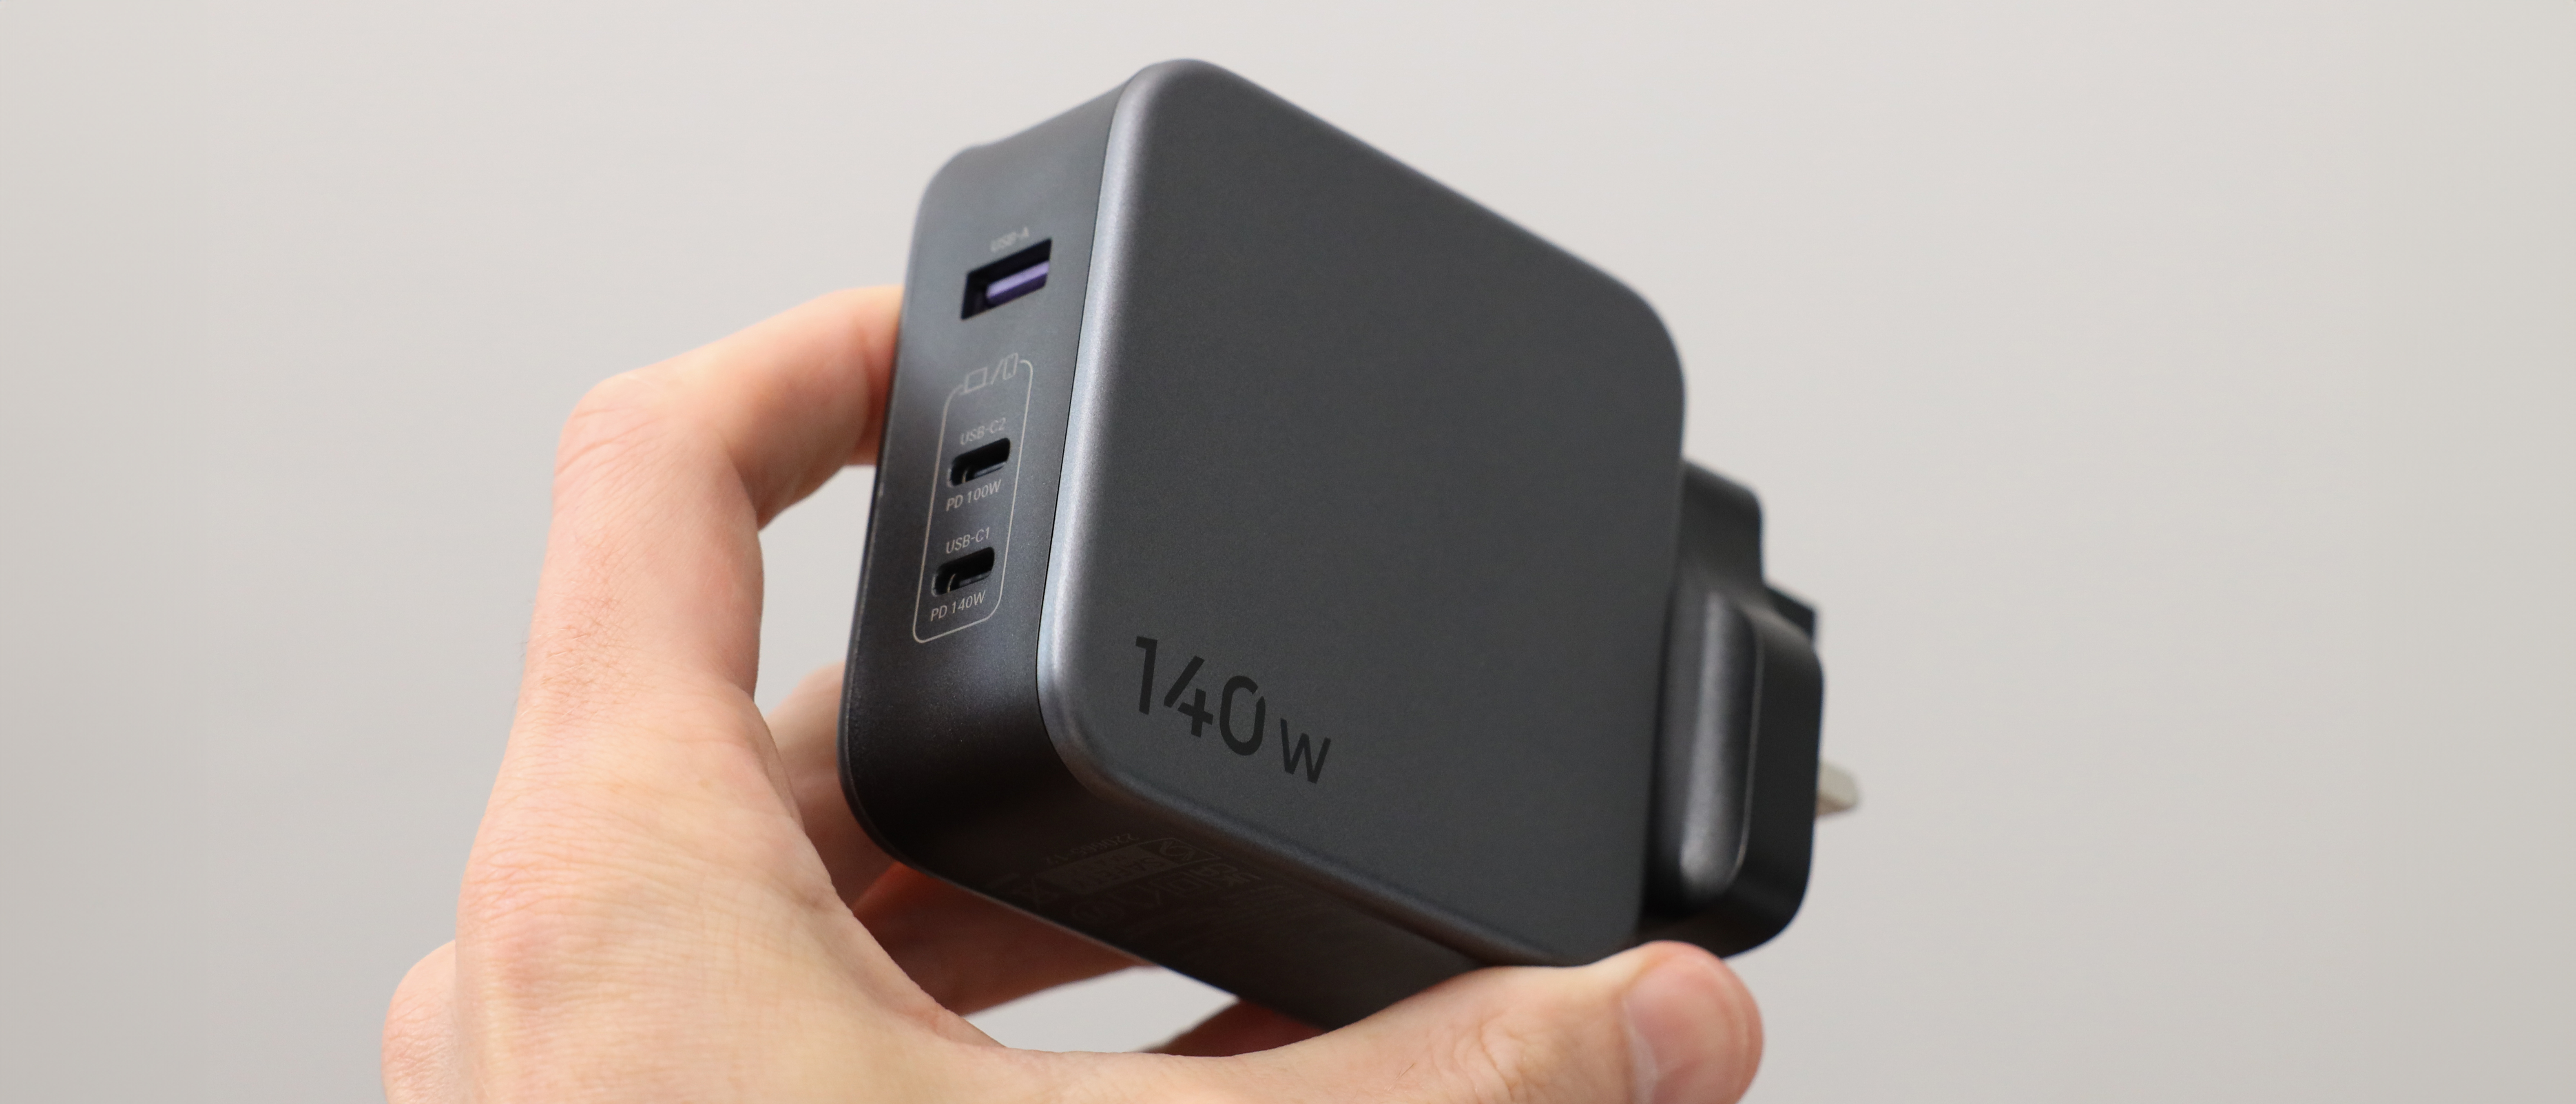 Ugreen's Nexode 140W GaN Charger Is Smaller, Cooler And More Efficient